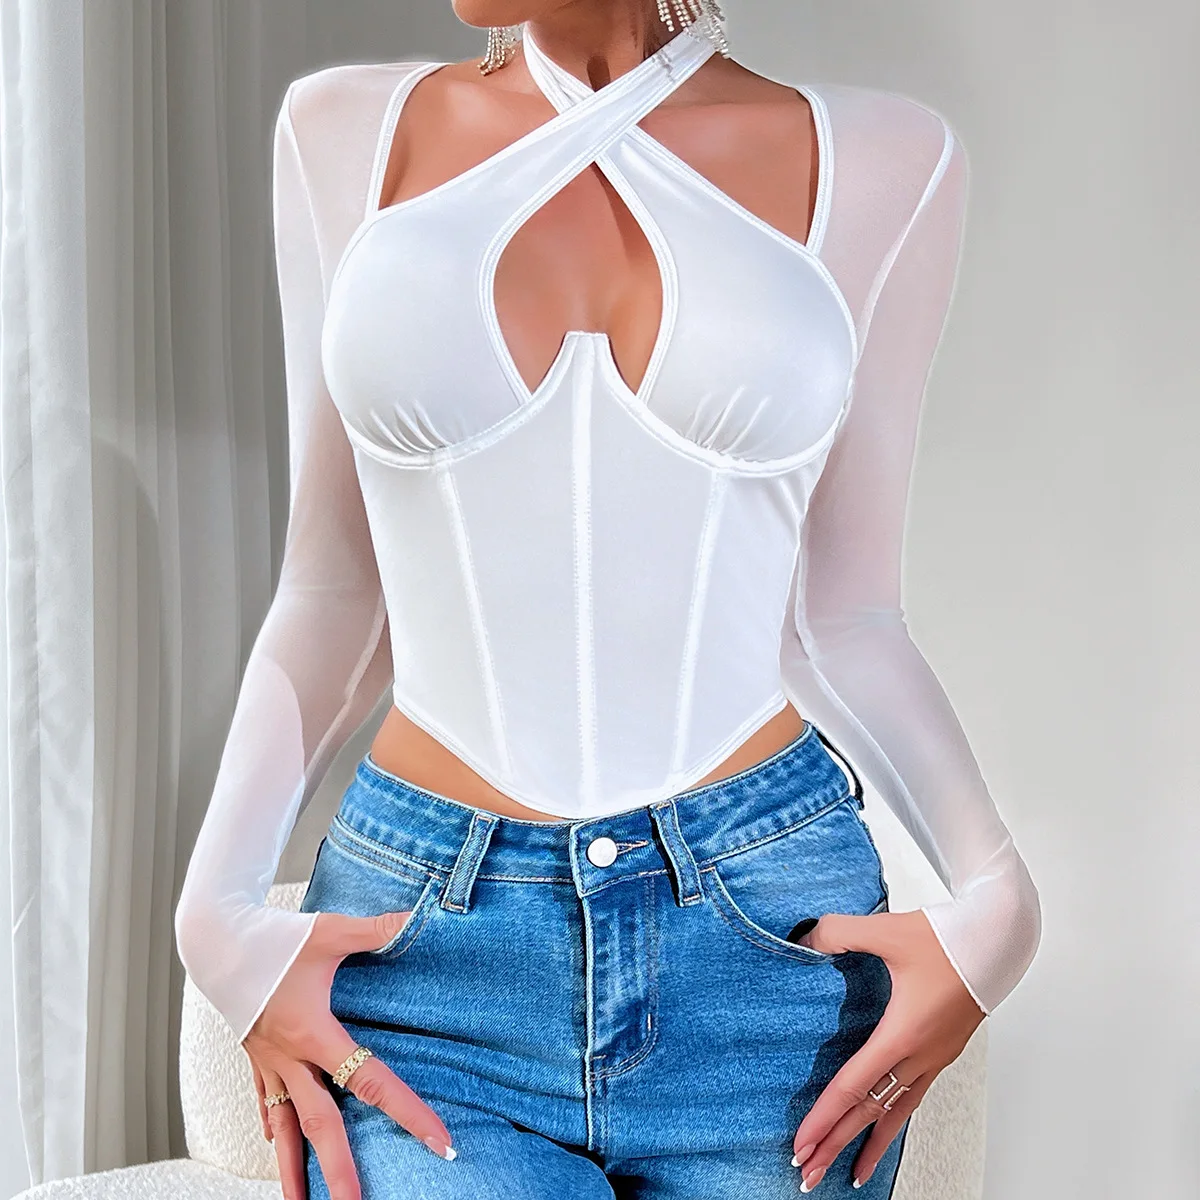 

Women's Hollow Out Sexy Bustier Corset Tops Summer Party Club Outfits Cross-halter Neck Long Sleeve Tank Top Slim Elegant Blouse